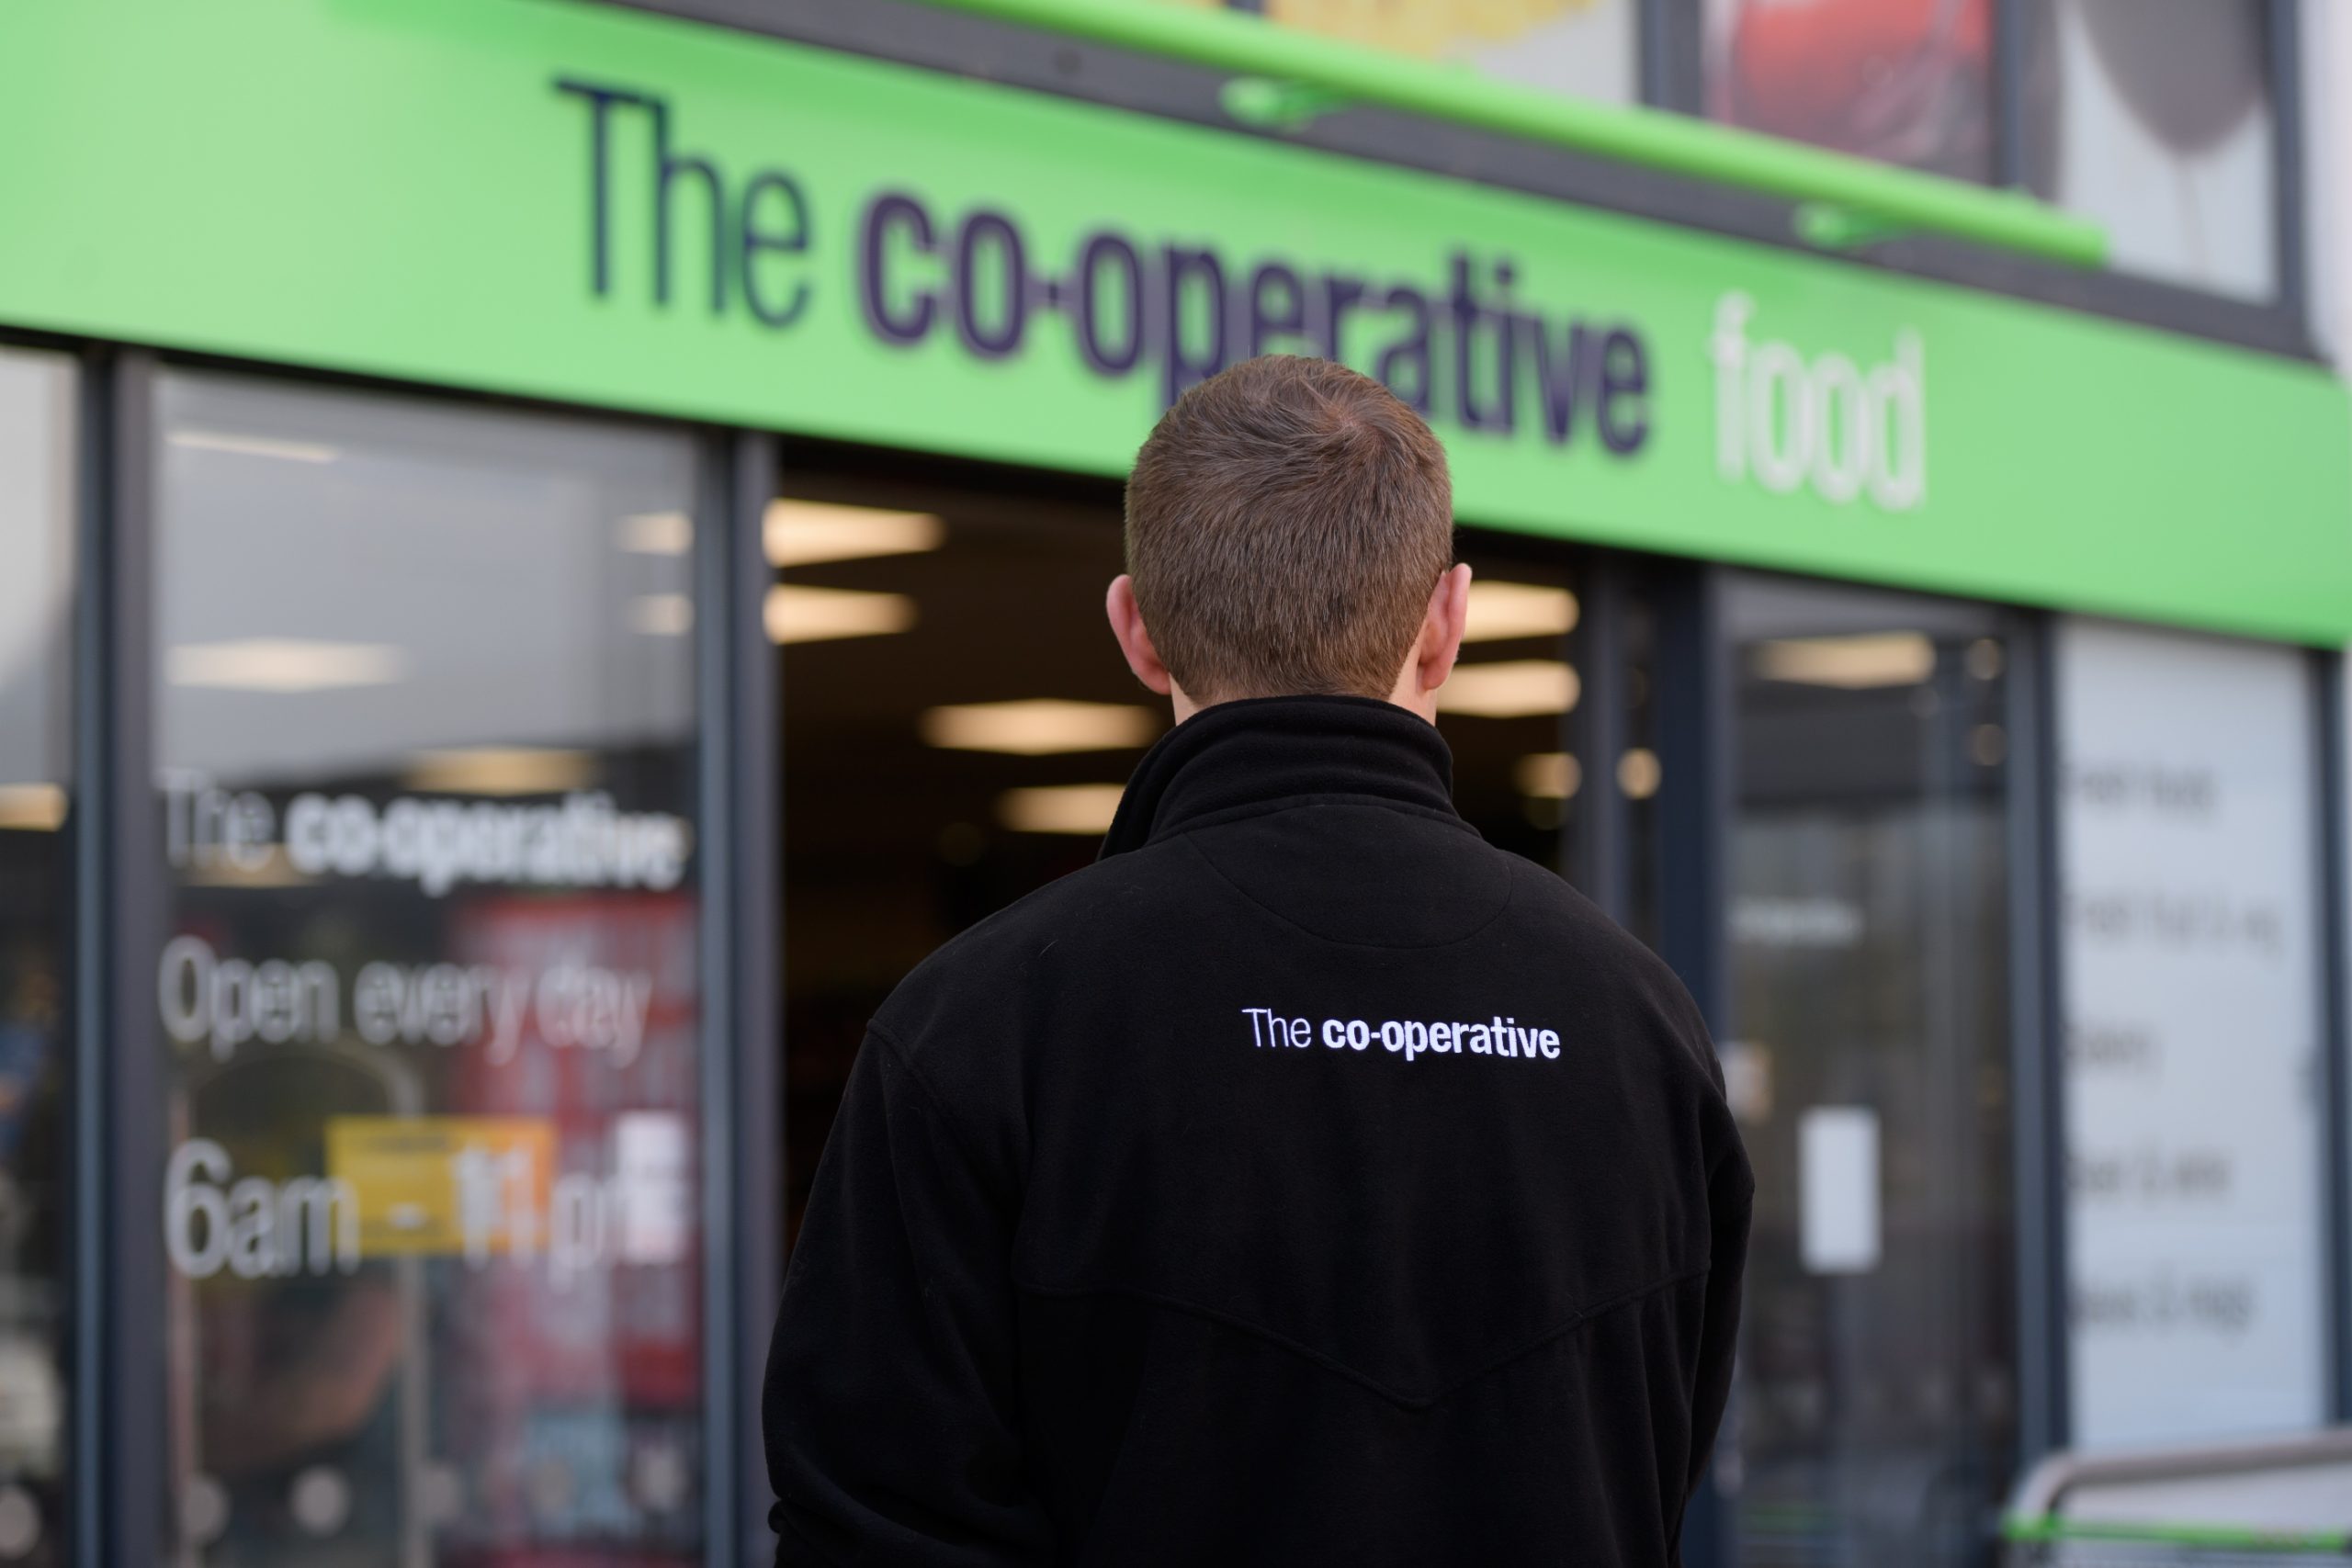 Southern Co-op's #ShopKind campaign for Christmas